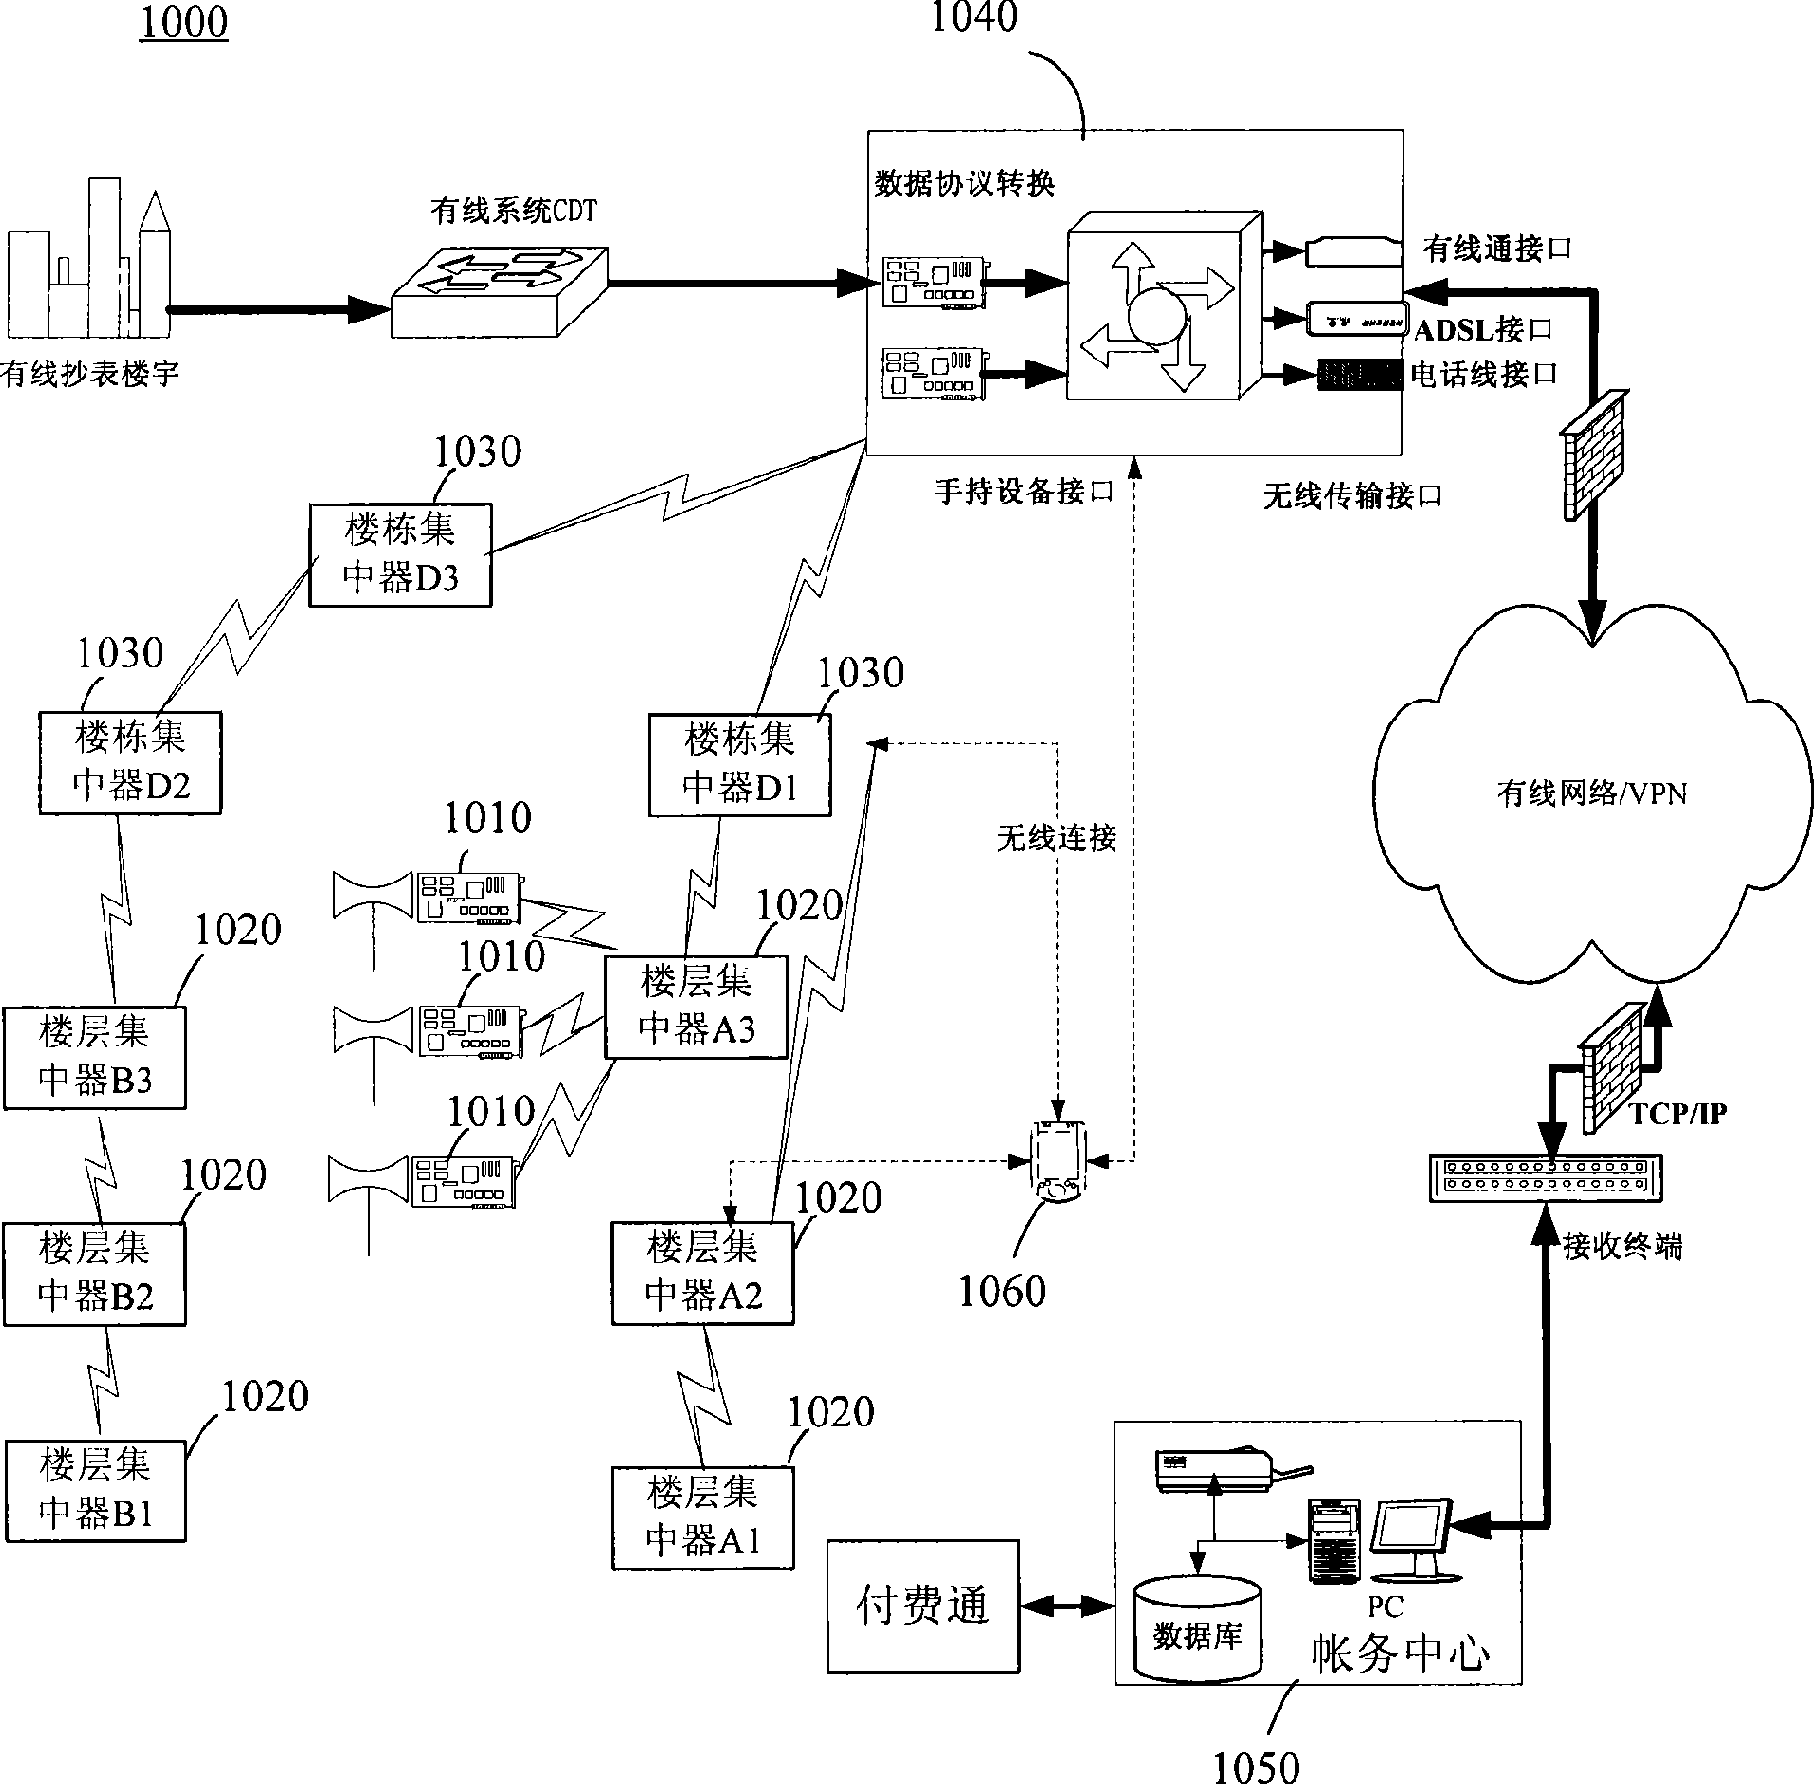 Data collection method used for remote wireless meter reading system